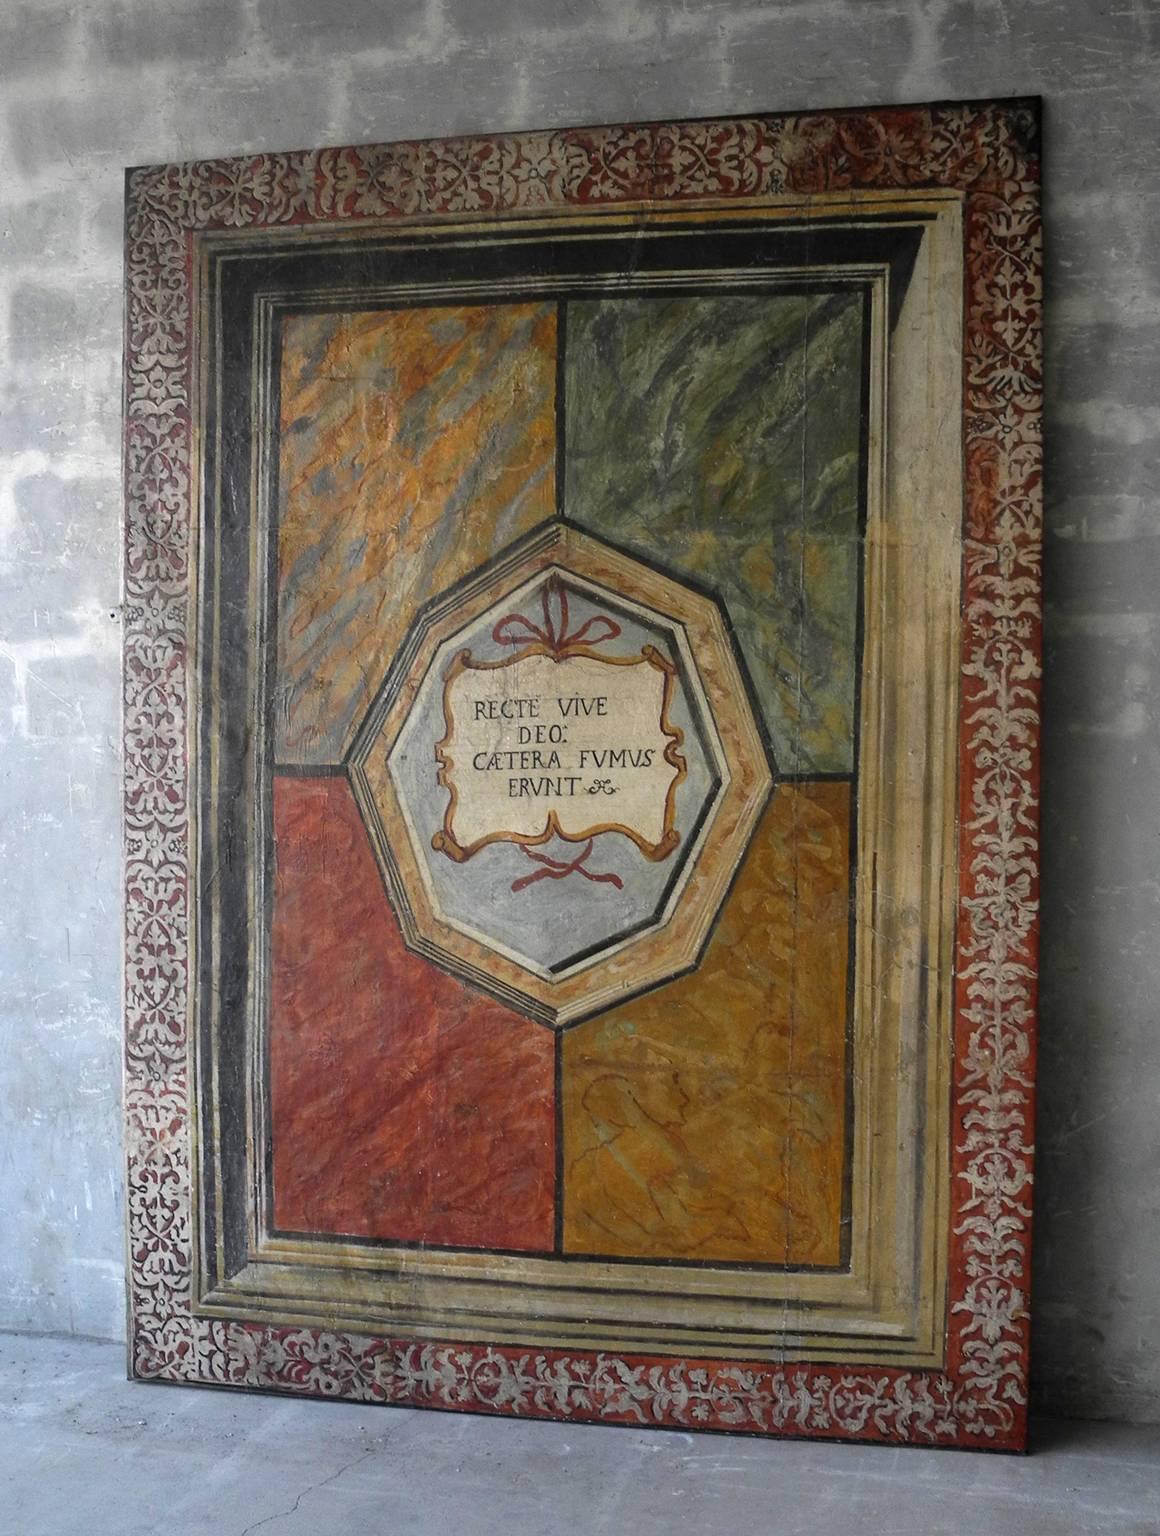 This is a fabulous and grand 16th century painted panel originally in a 